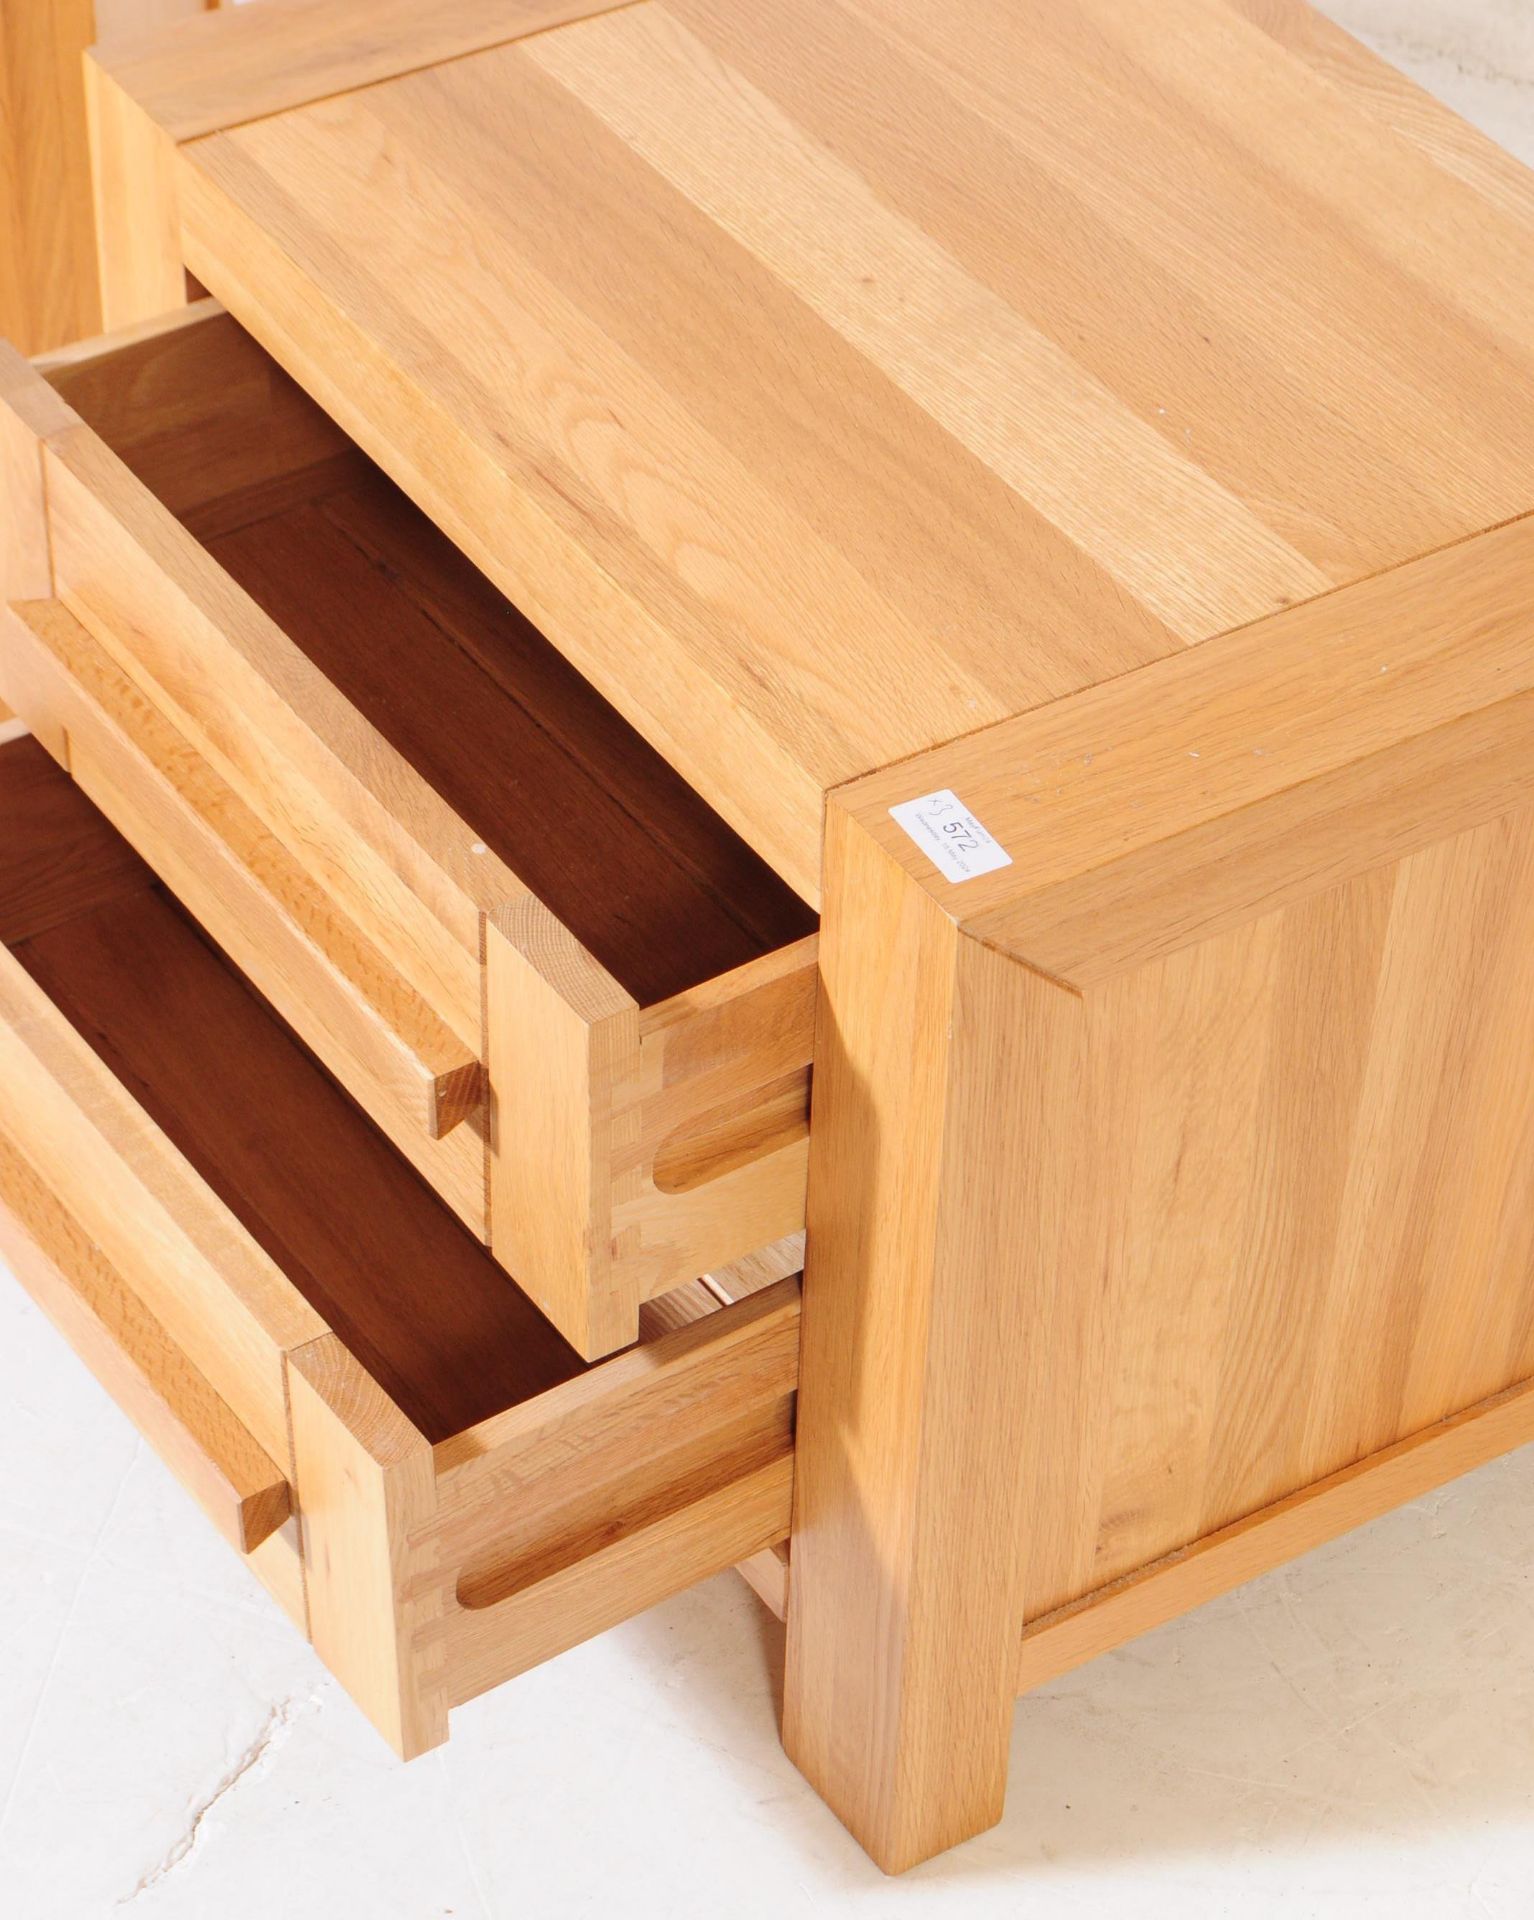 M&S SONOMA - PAIR OF OAK BEDSIDE TABLES - Image 9 of 11